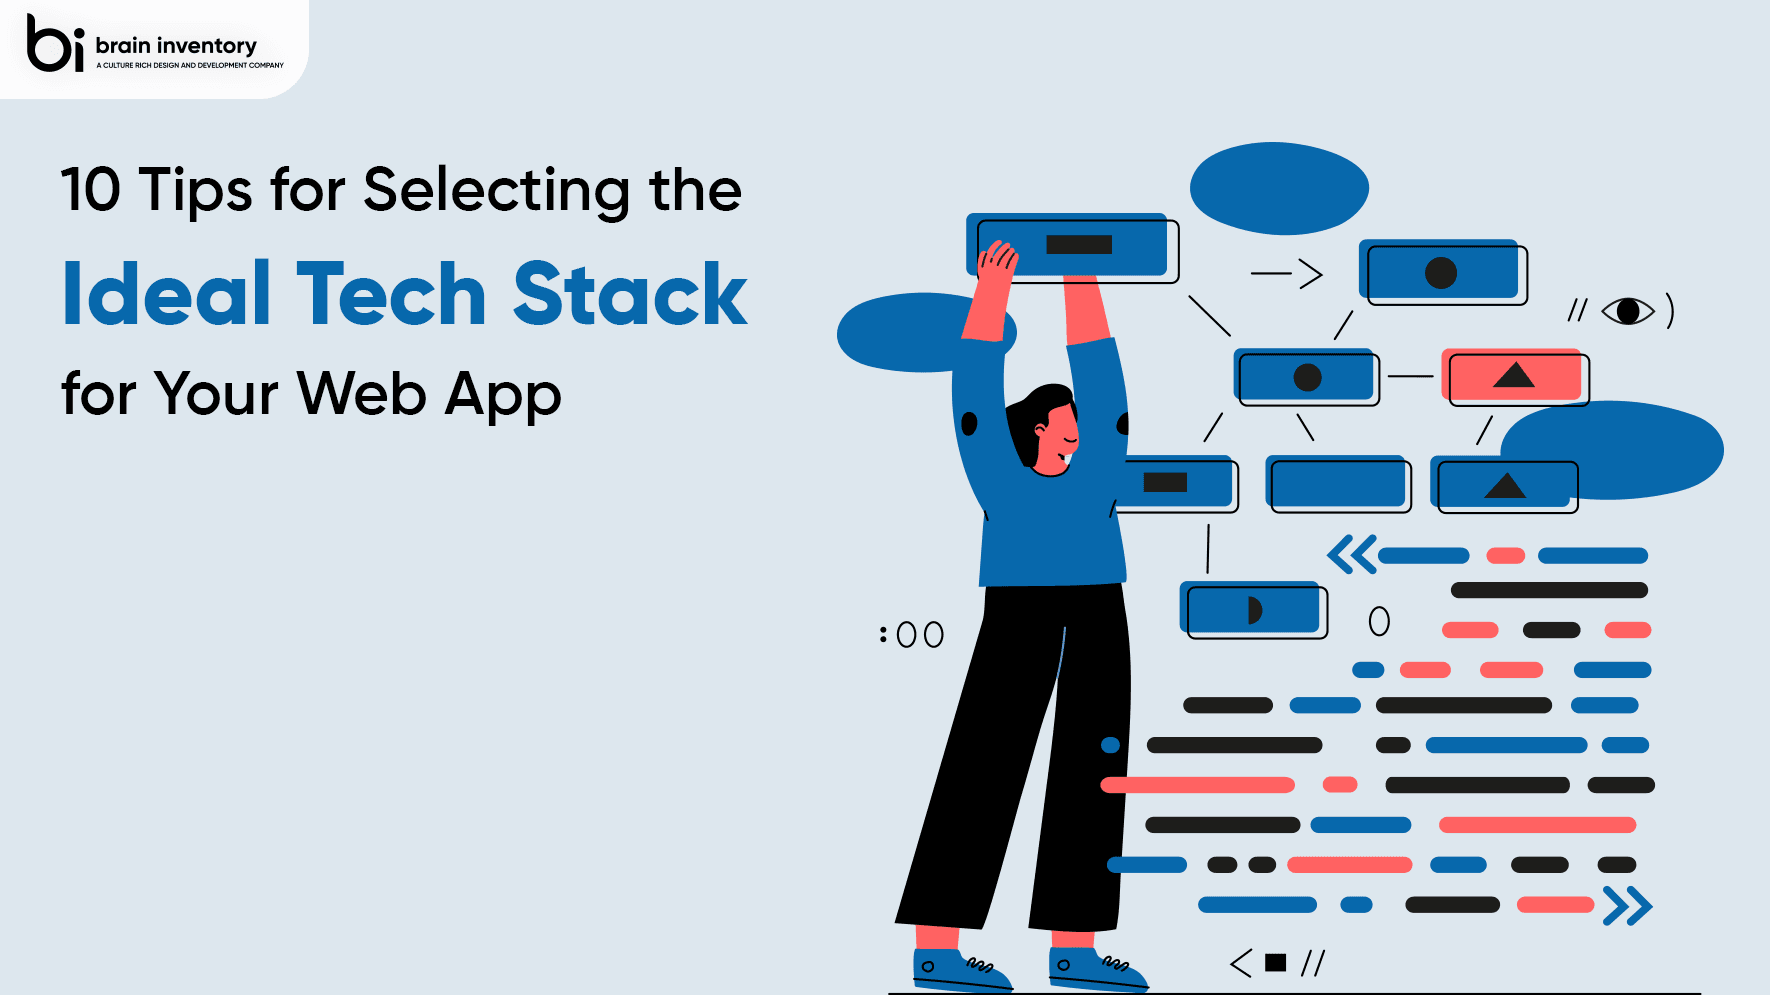 10 Tips for Selecting the Ideal Tech Stack for Your Web App